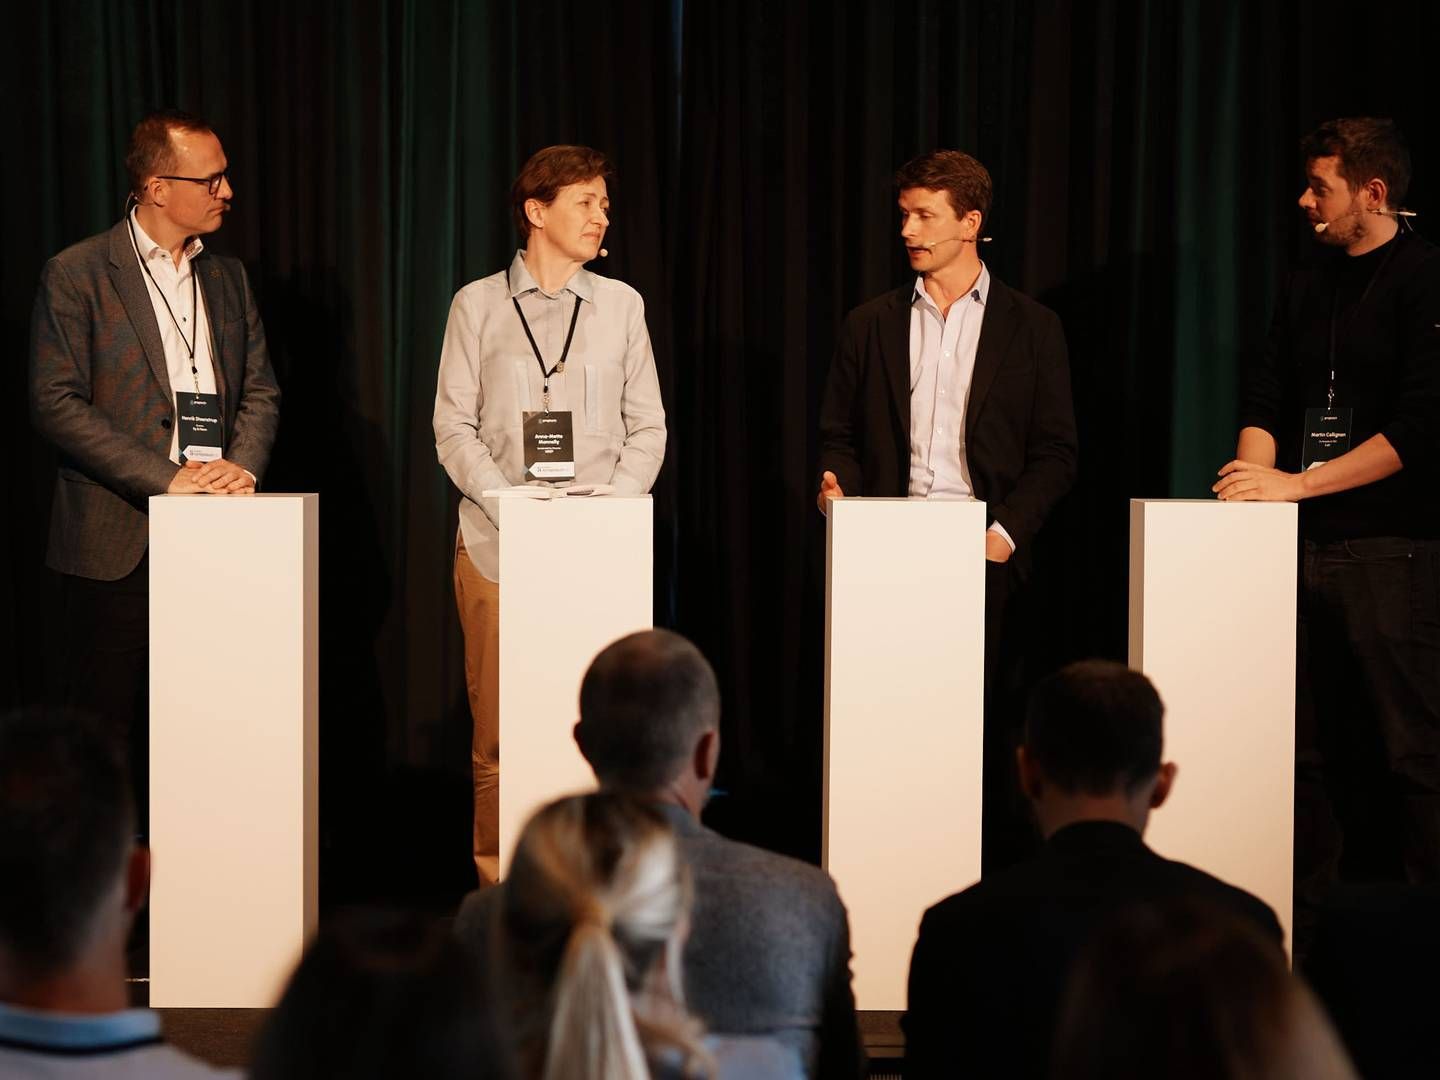 A panel discussion at PropTech Symposium on Monday focused on ESG. From the left side: Henrik Steenstrup from CPH City and Port Development, Anna-Mette Monnelly from NREP, Draniel Kraft from Stronghold Invest, and moderator Martin Collignon. | Foto: PR / Proptech Denmark / Rune Svenningsen